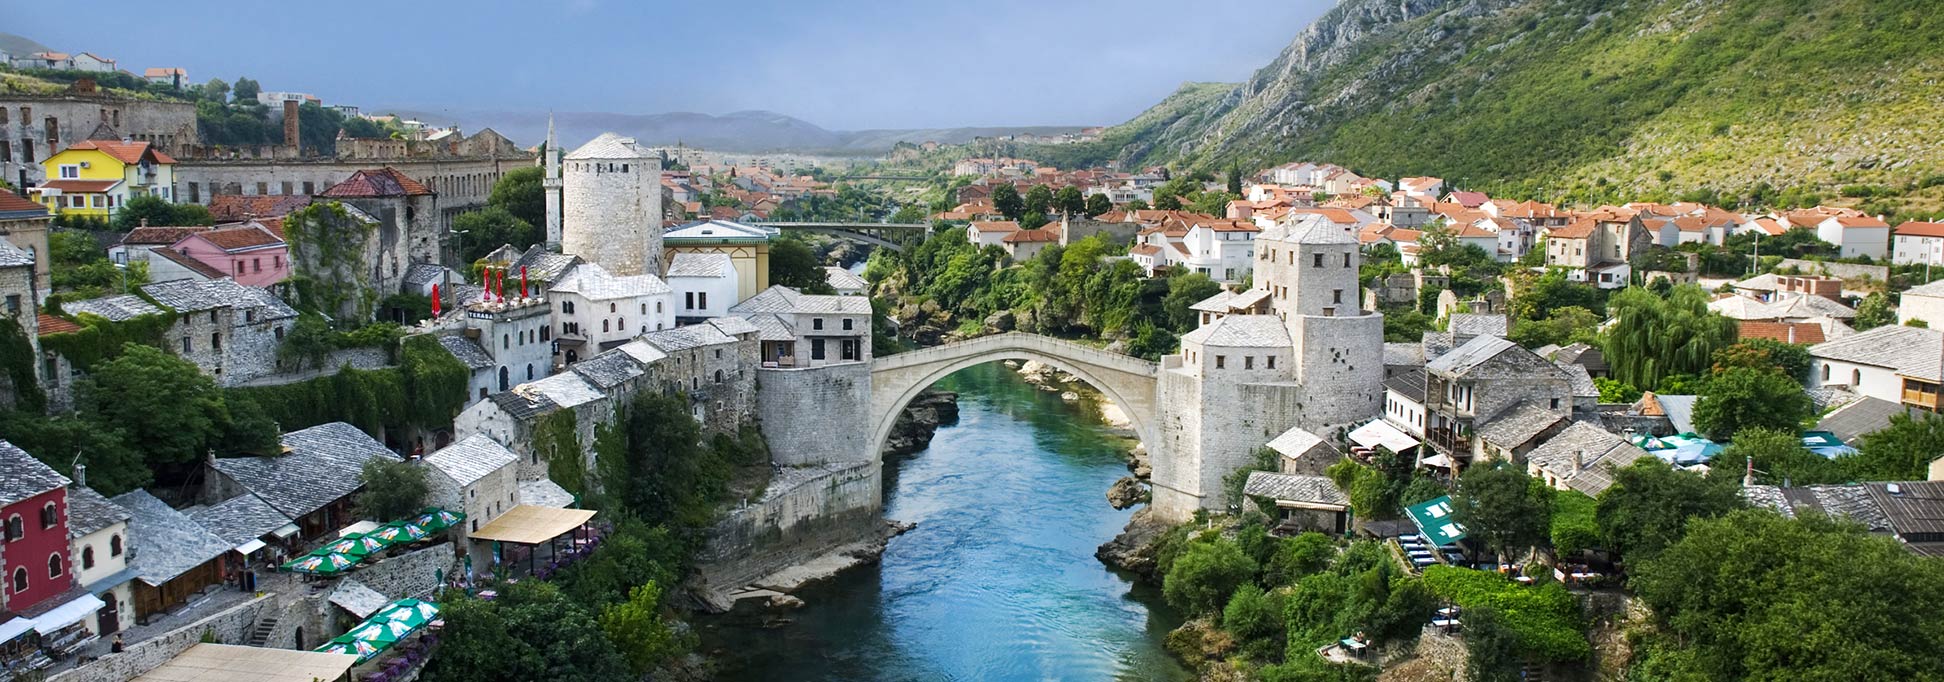 Old Town of Mostar with Stari Most (bridge) over the Neretva river.